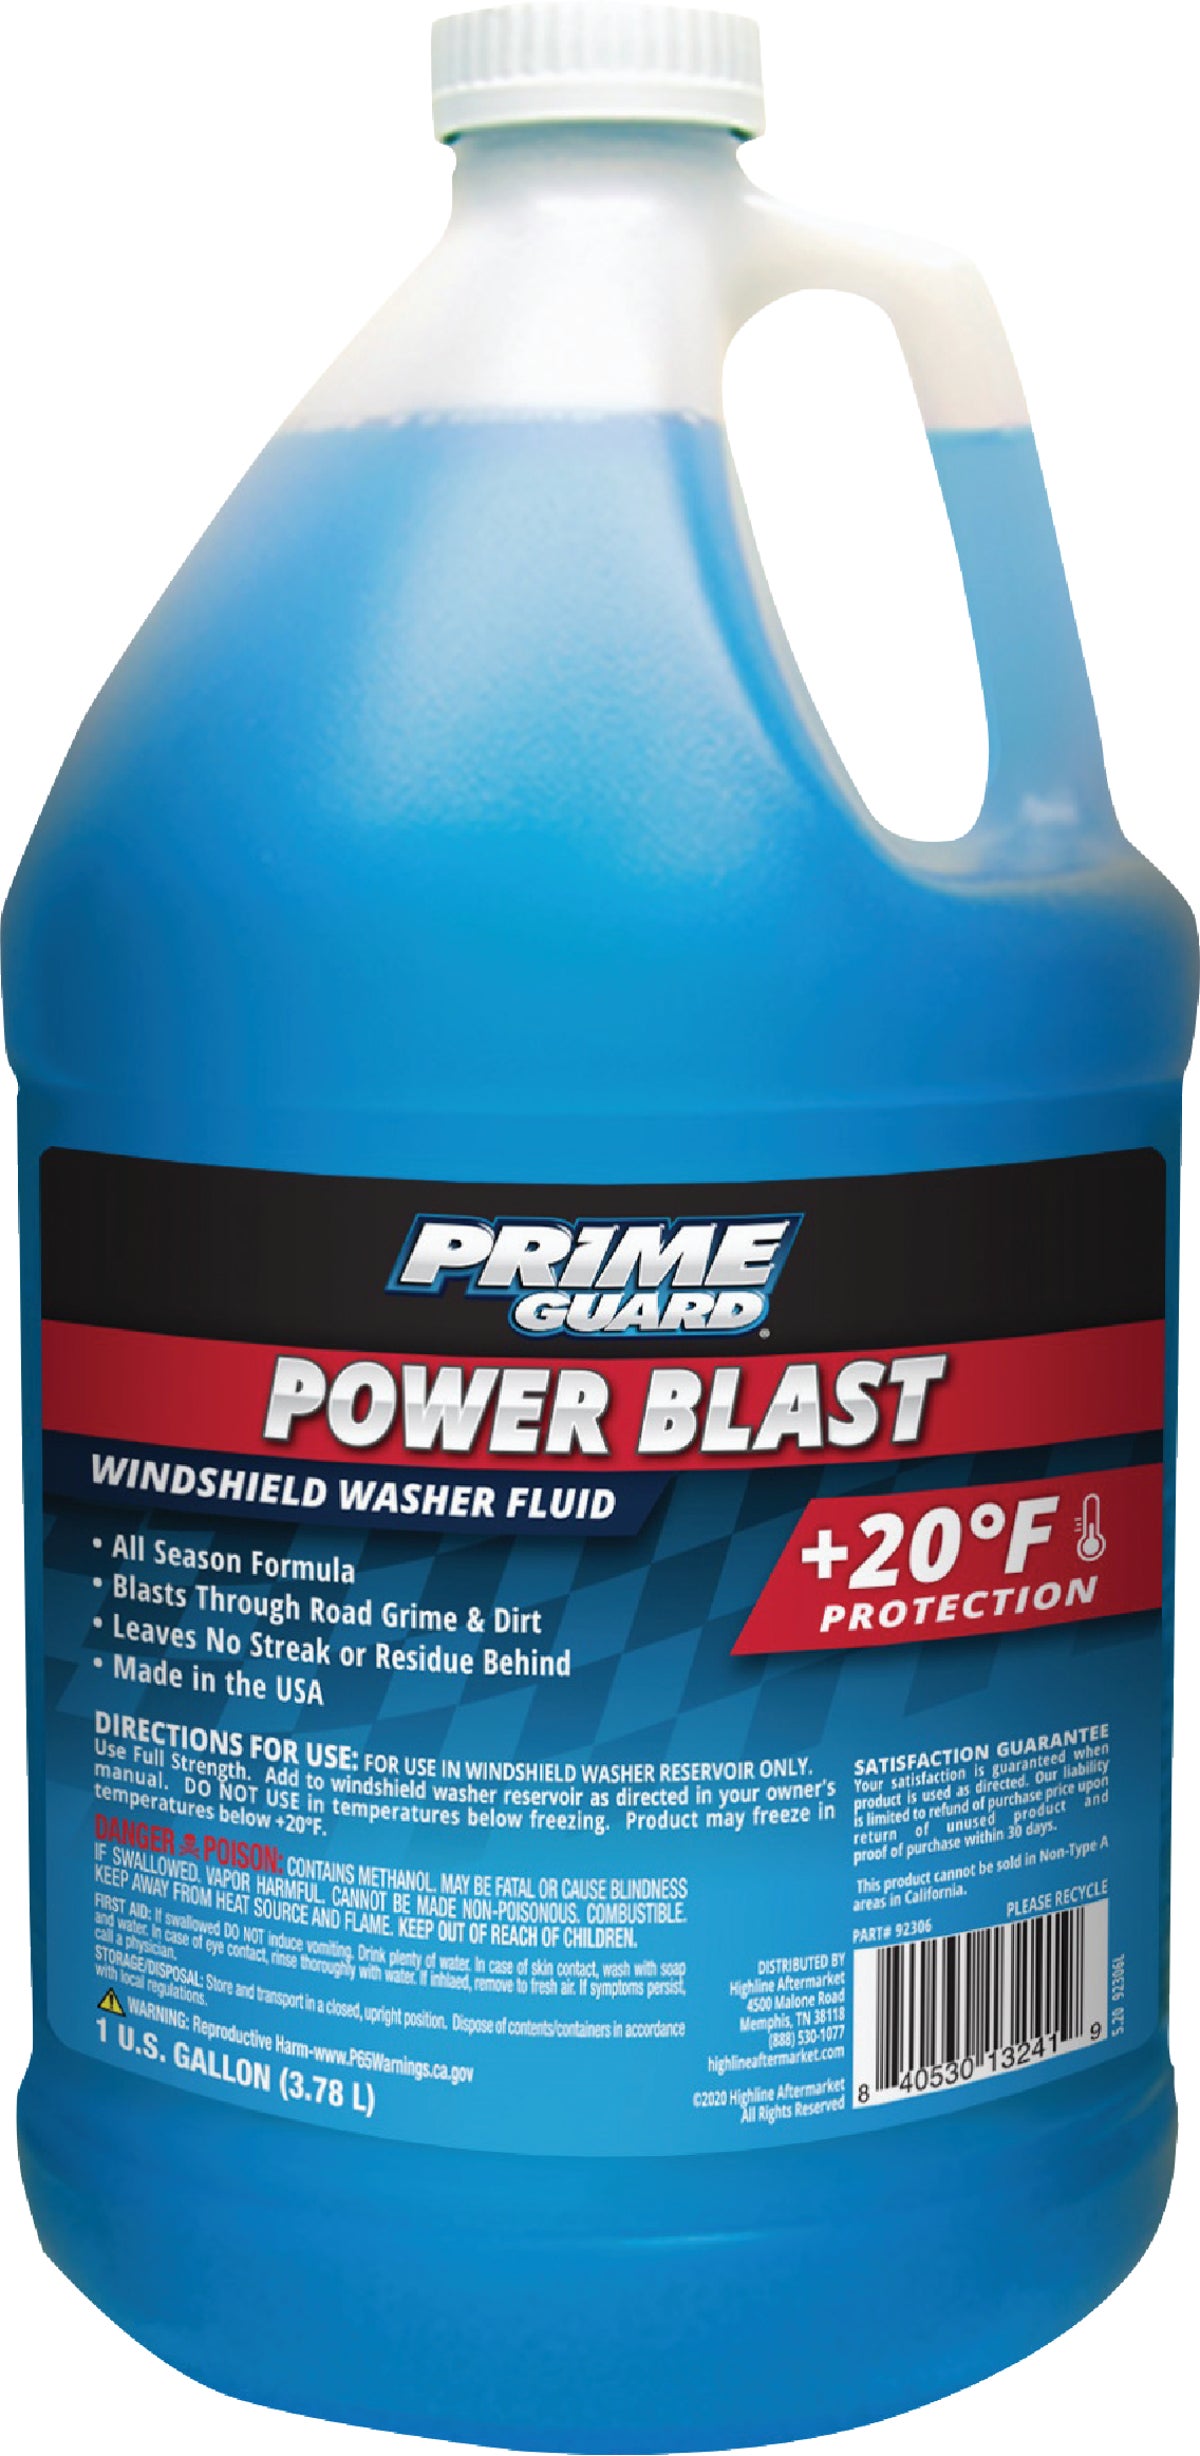 Prime Guard Power Blast +20 Windshield Washer Fluid 1 Gal. (Pack of 6)